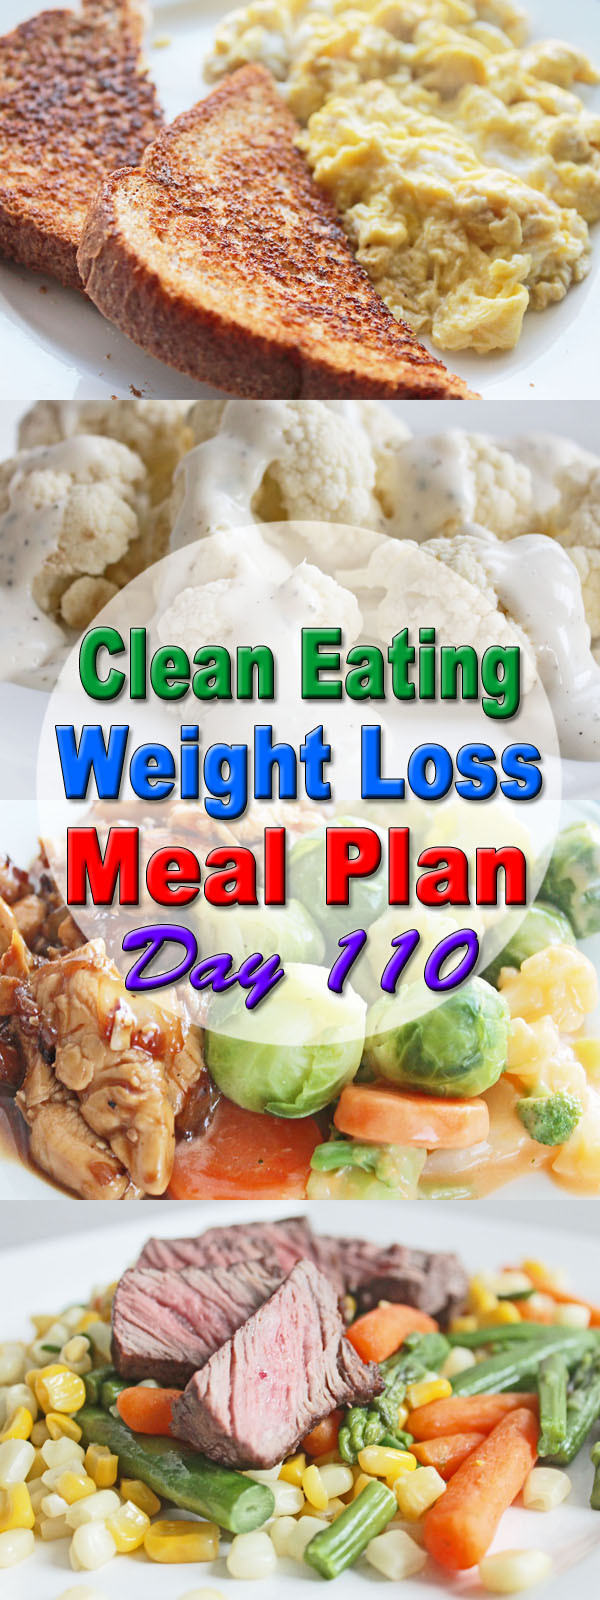 Clean Eating Weight Loss Meal Plan
 Clean Eating Weight Loss Meal Plan 110